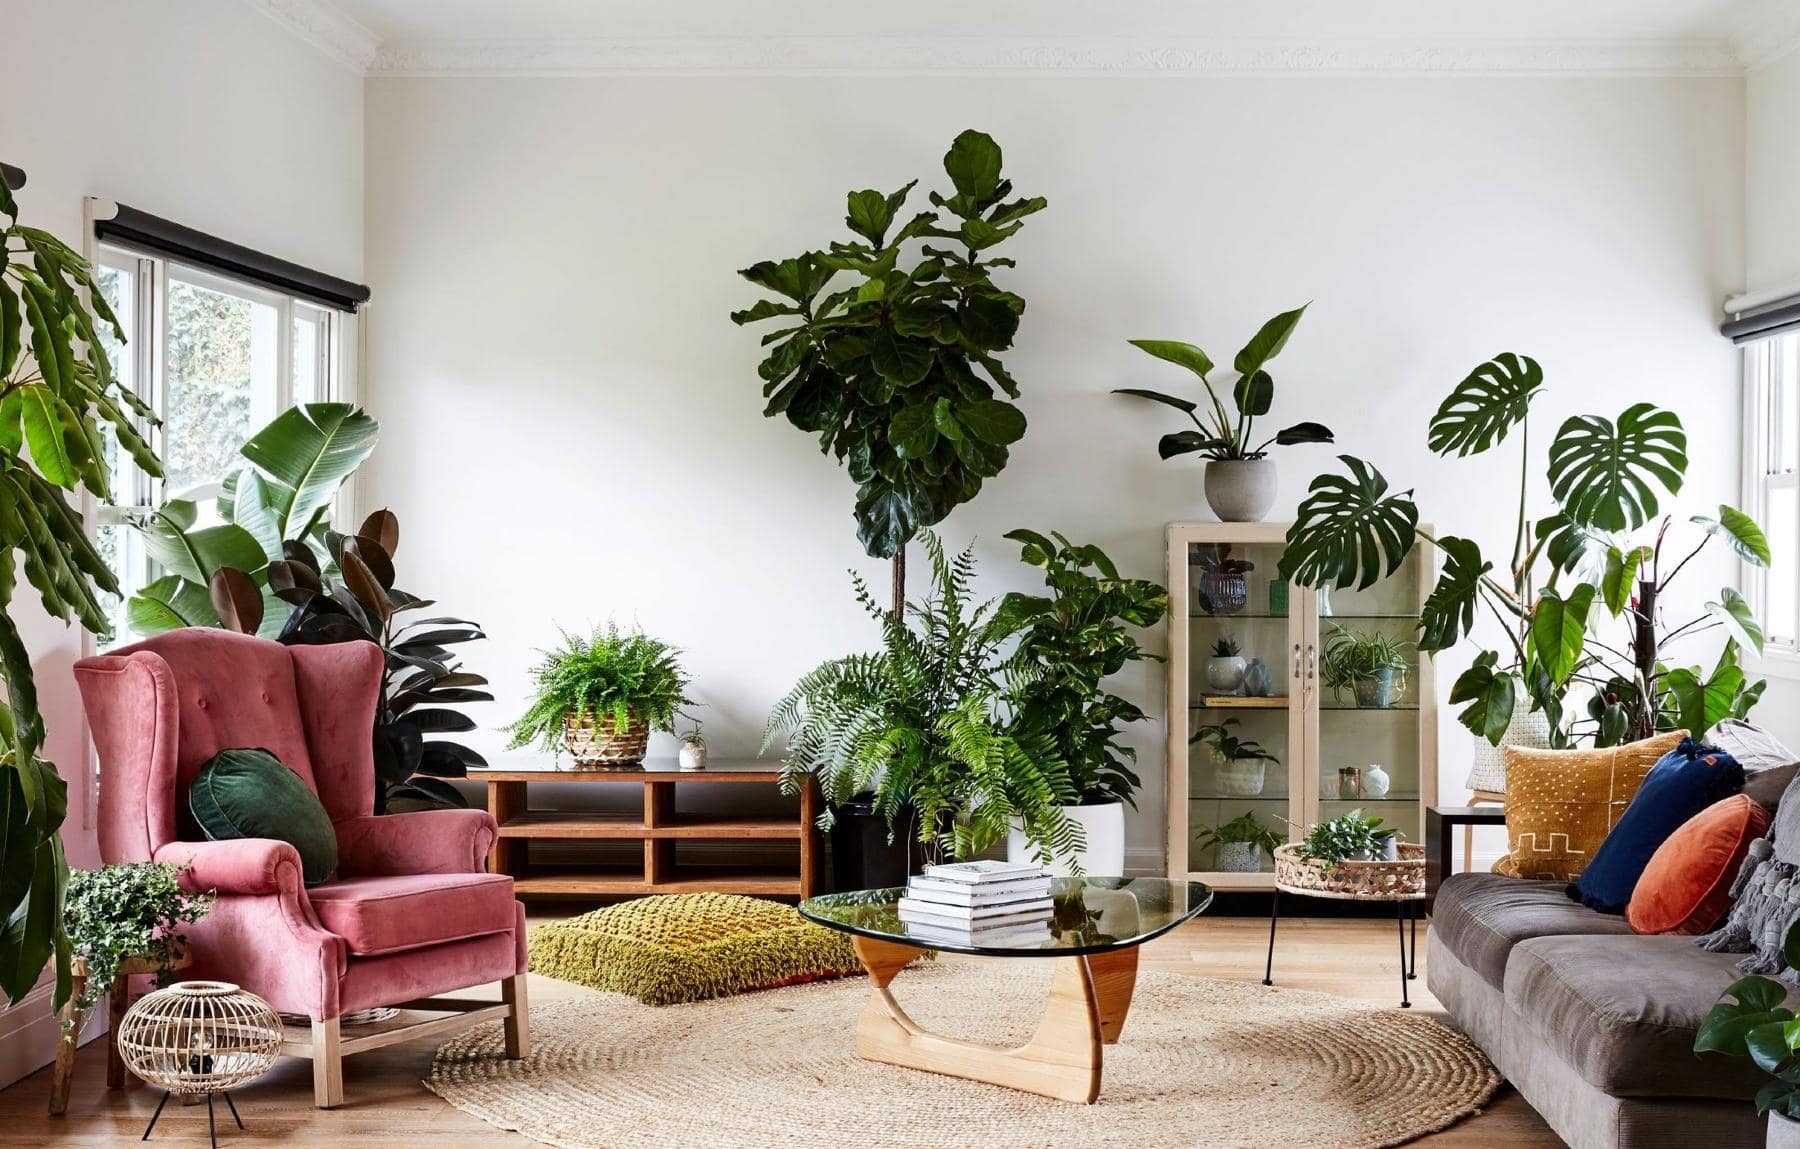 How To Decorate The Living Room With Plants